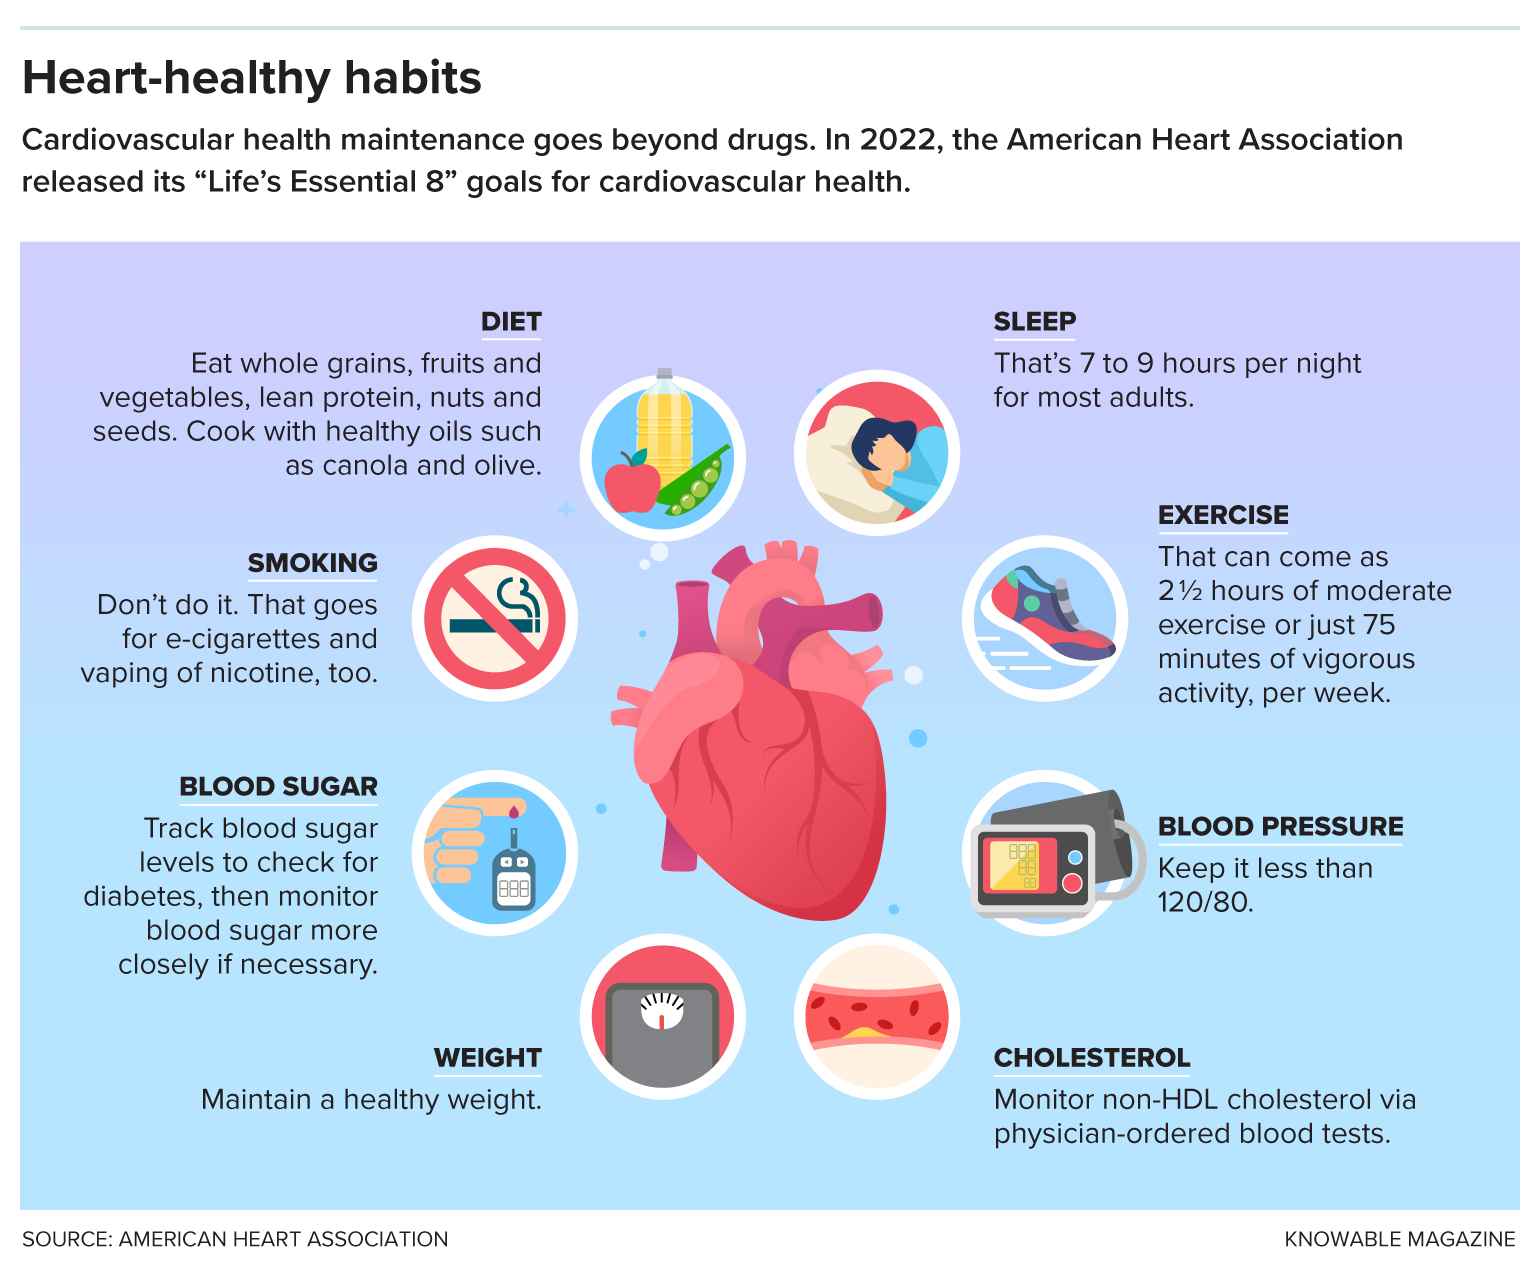 A graphic illustrates a heart surrounded by icons representing the eight health habits: sleep, exercise, blood pressure, cholesterol, weight, blood sugar, smoking and diet.